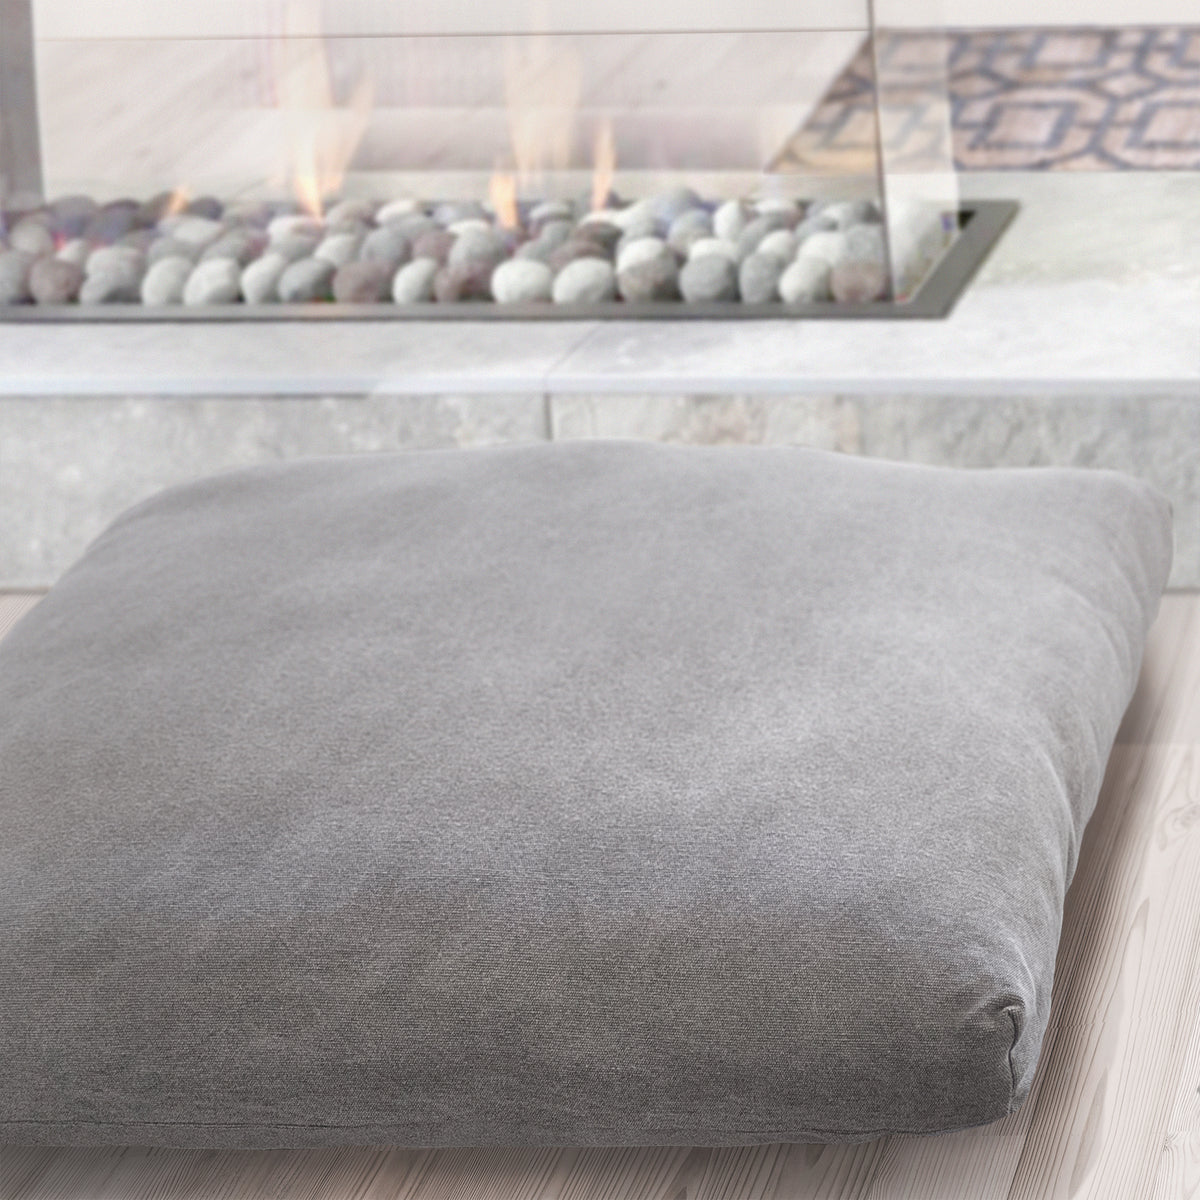 Lifestyle photo. Floor cushion on a wood floor in front of a fireplace.